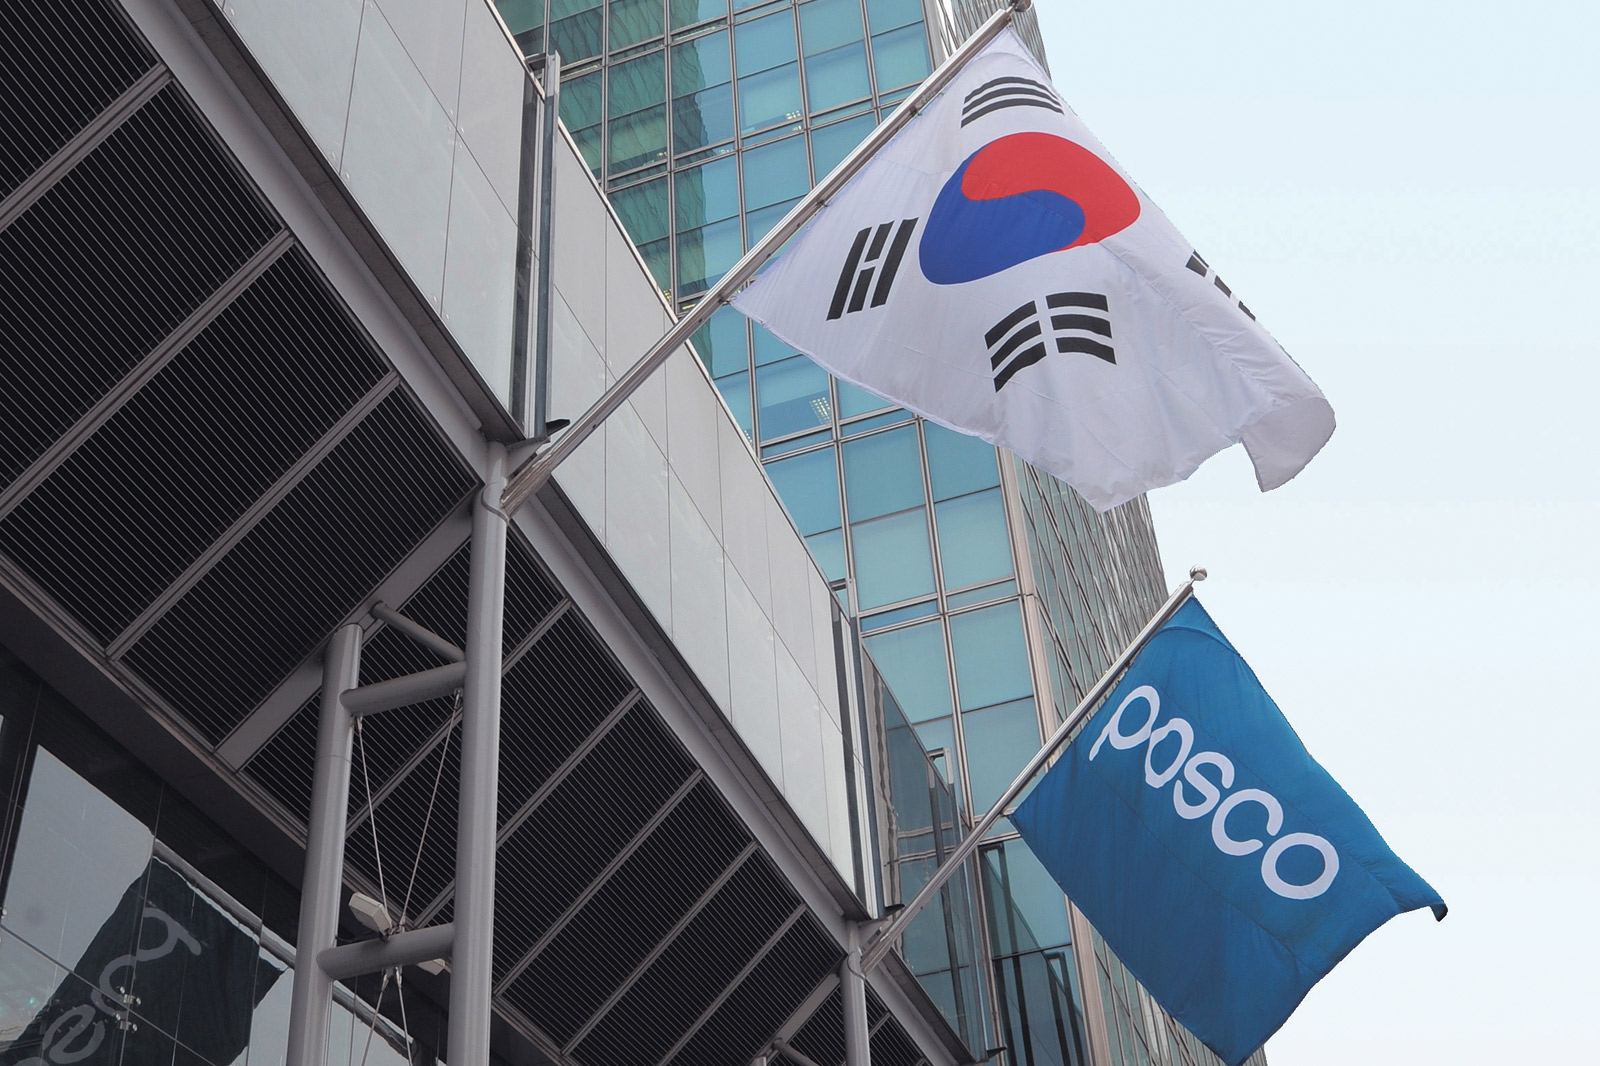 Posco procures carbon-neutral LNG from RWE